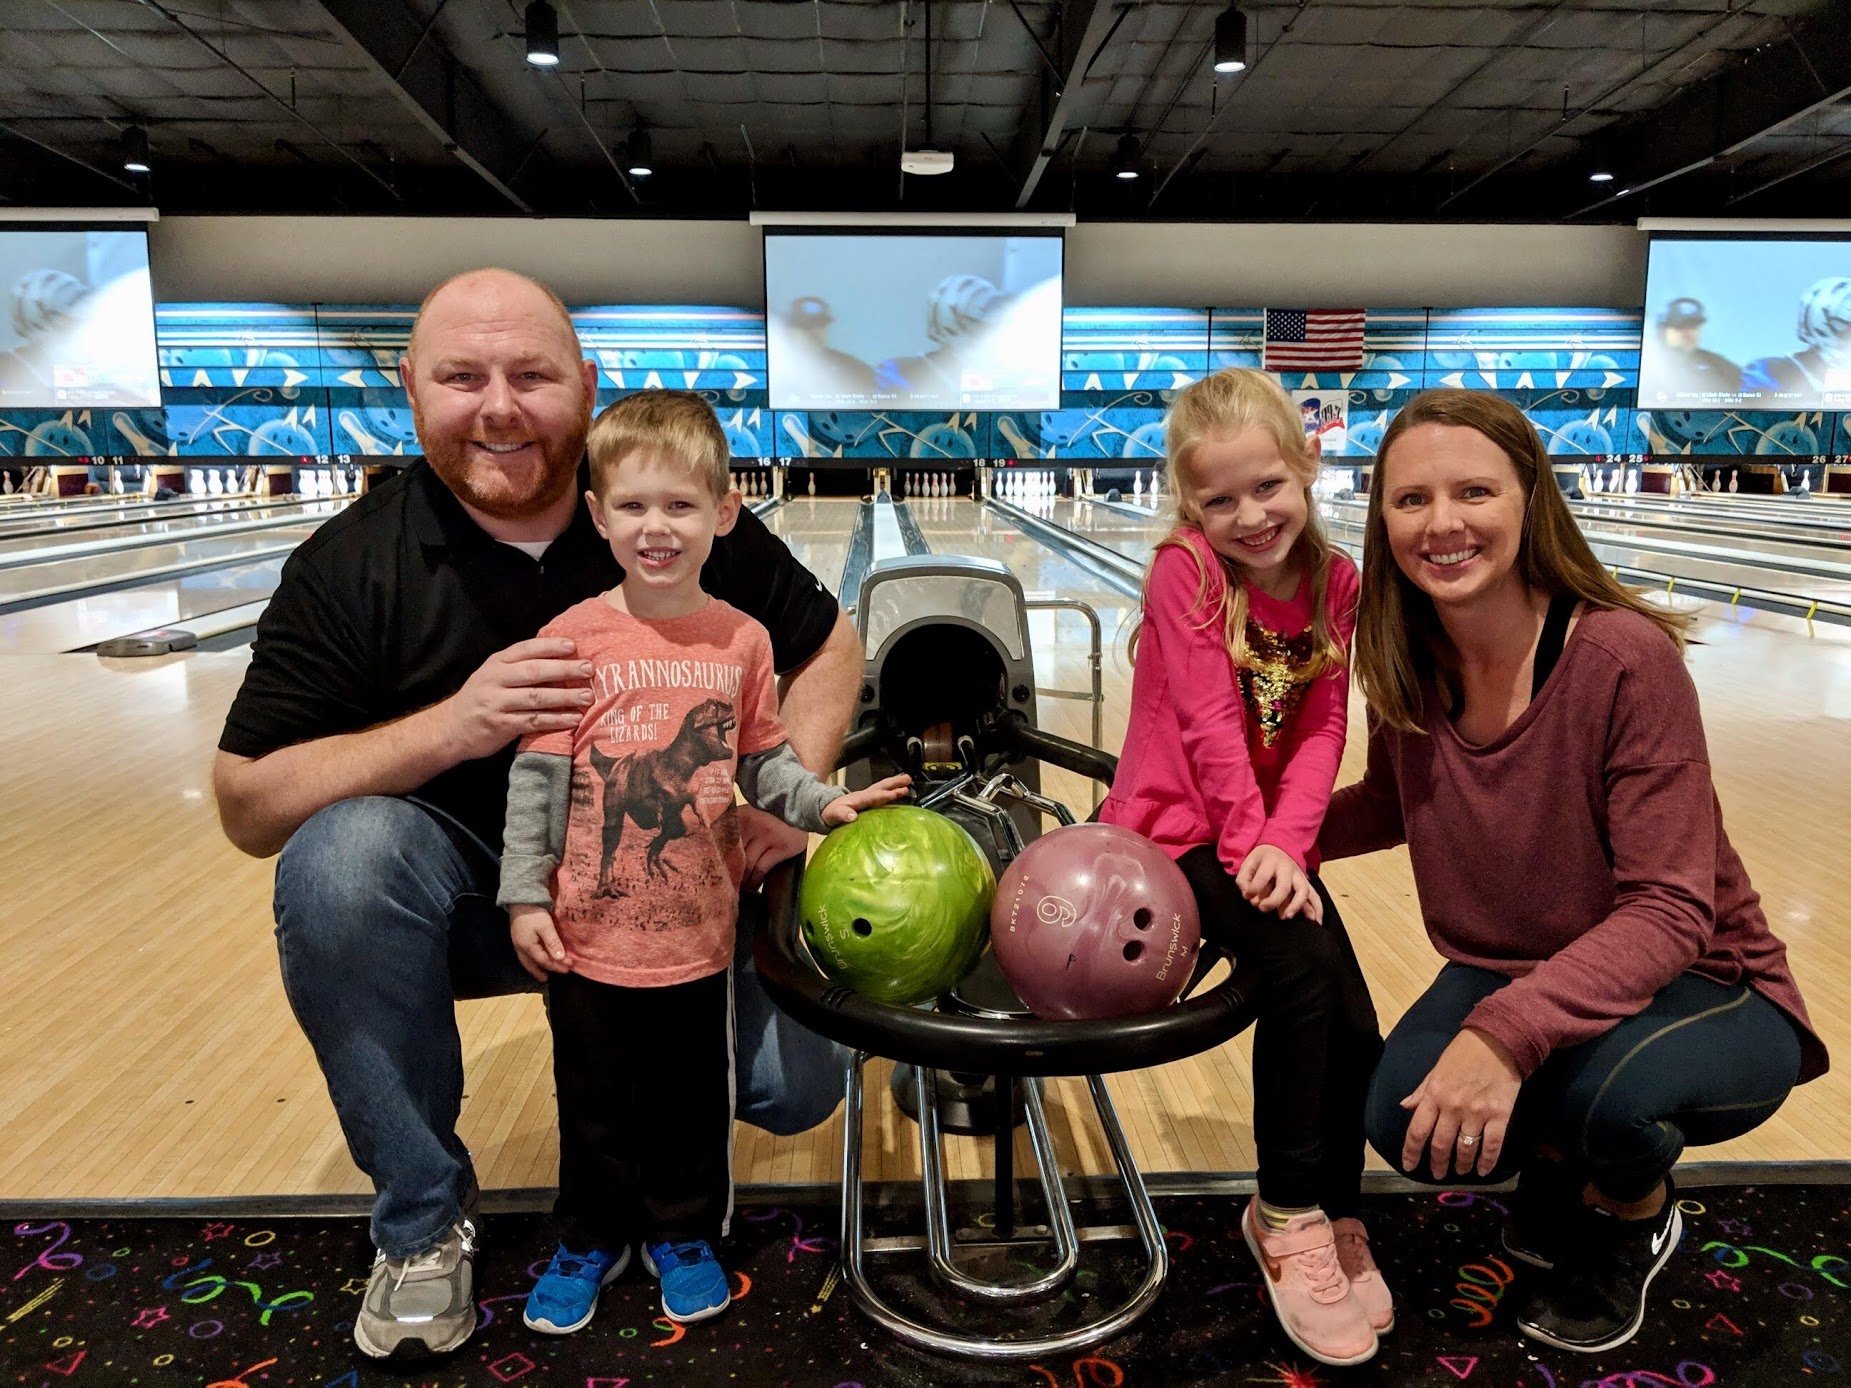 All summer kids can bowl for free at Strikz Entertainment in Frisco!